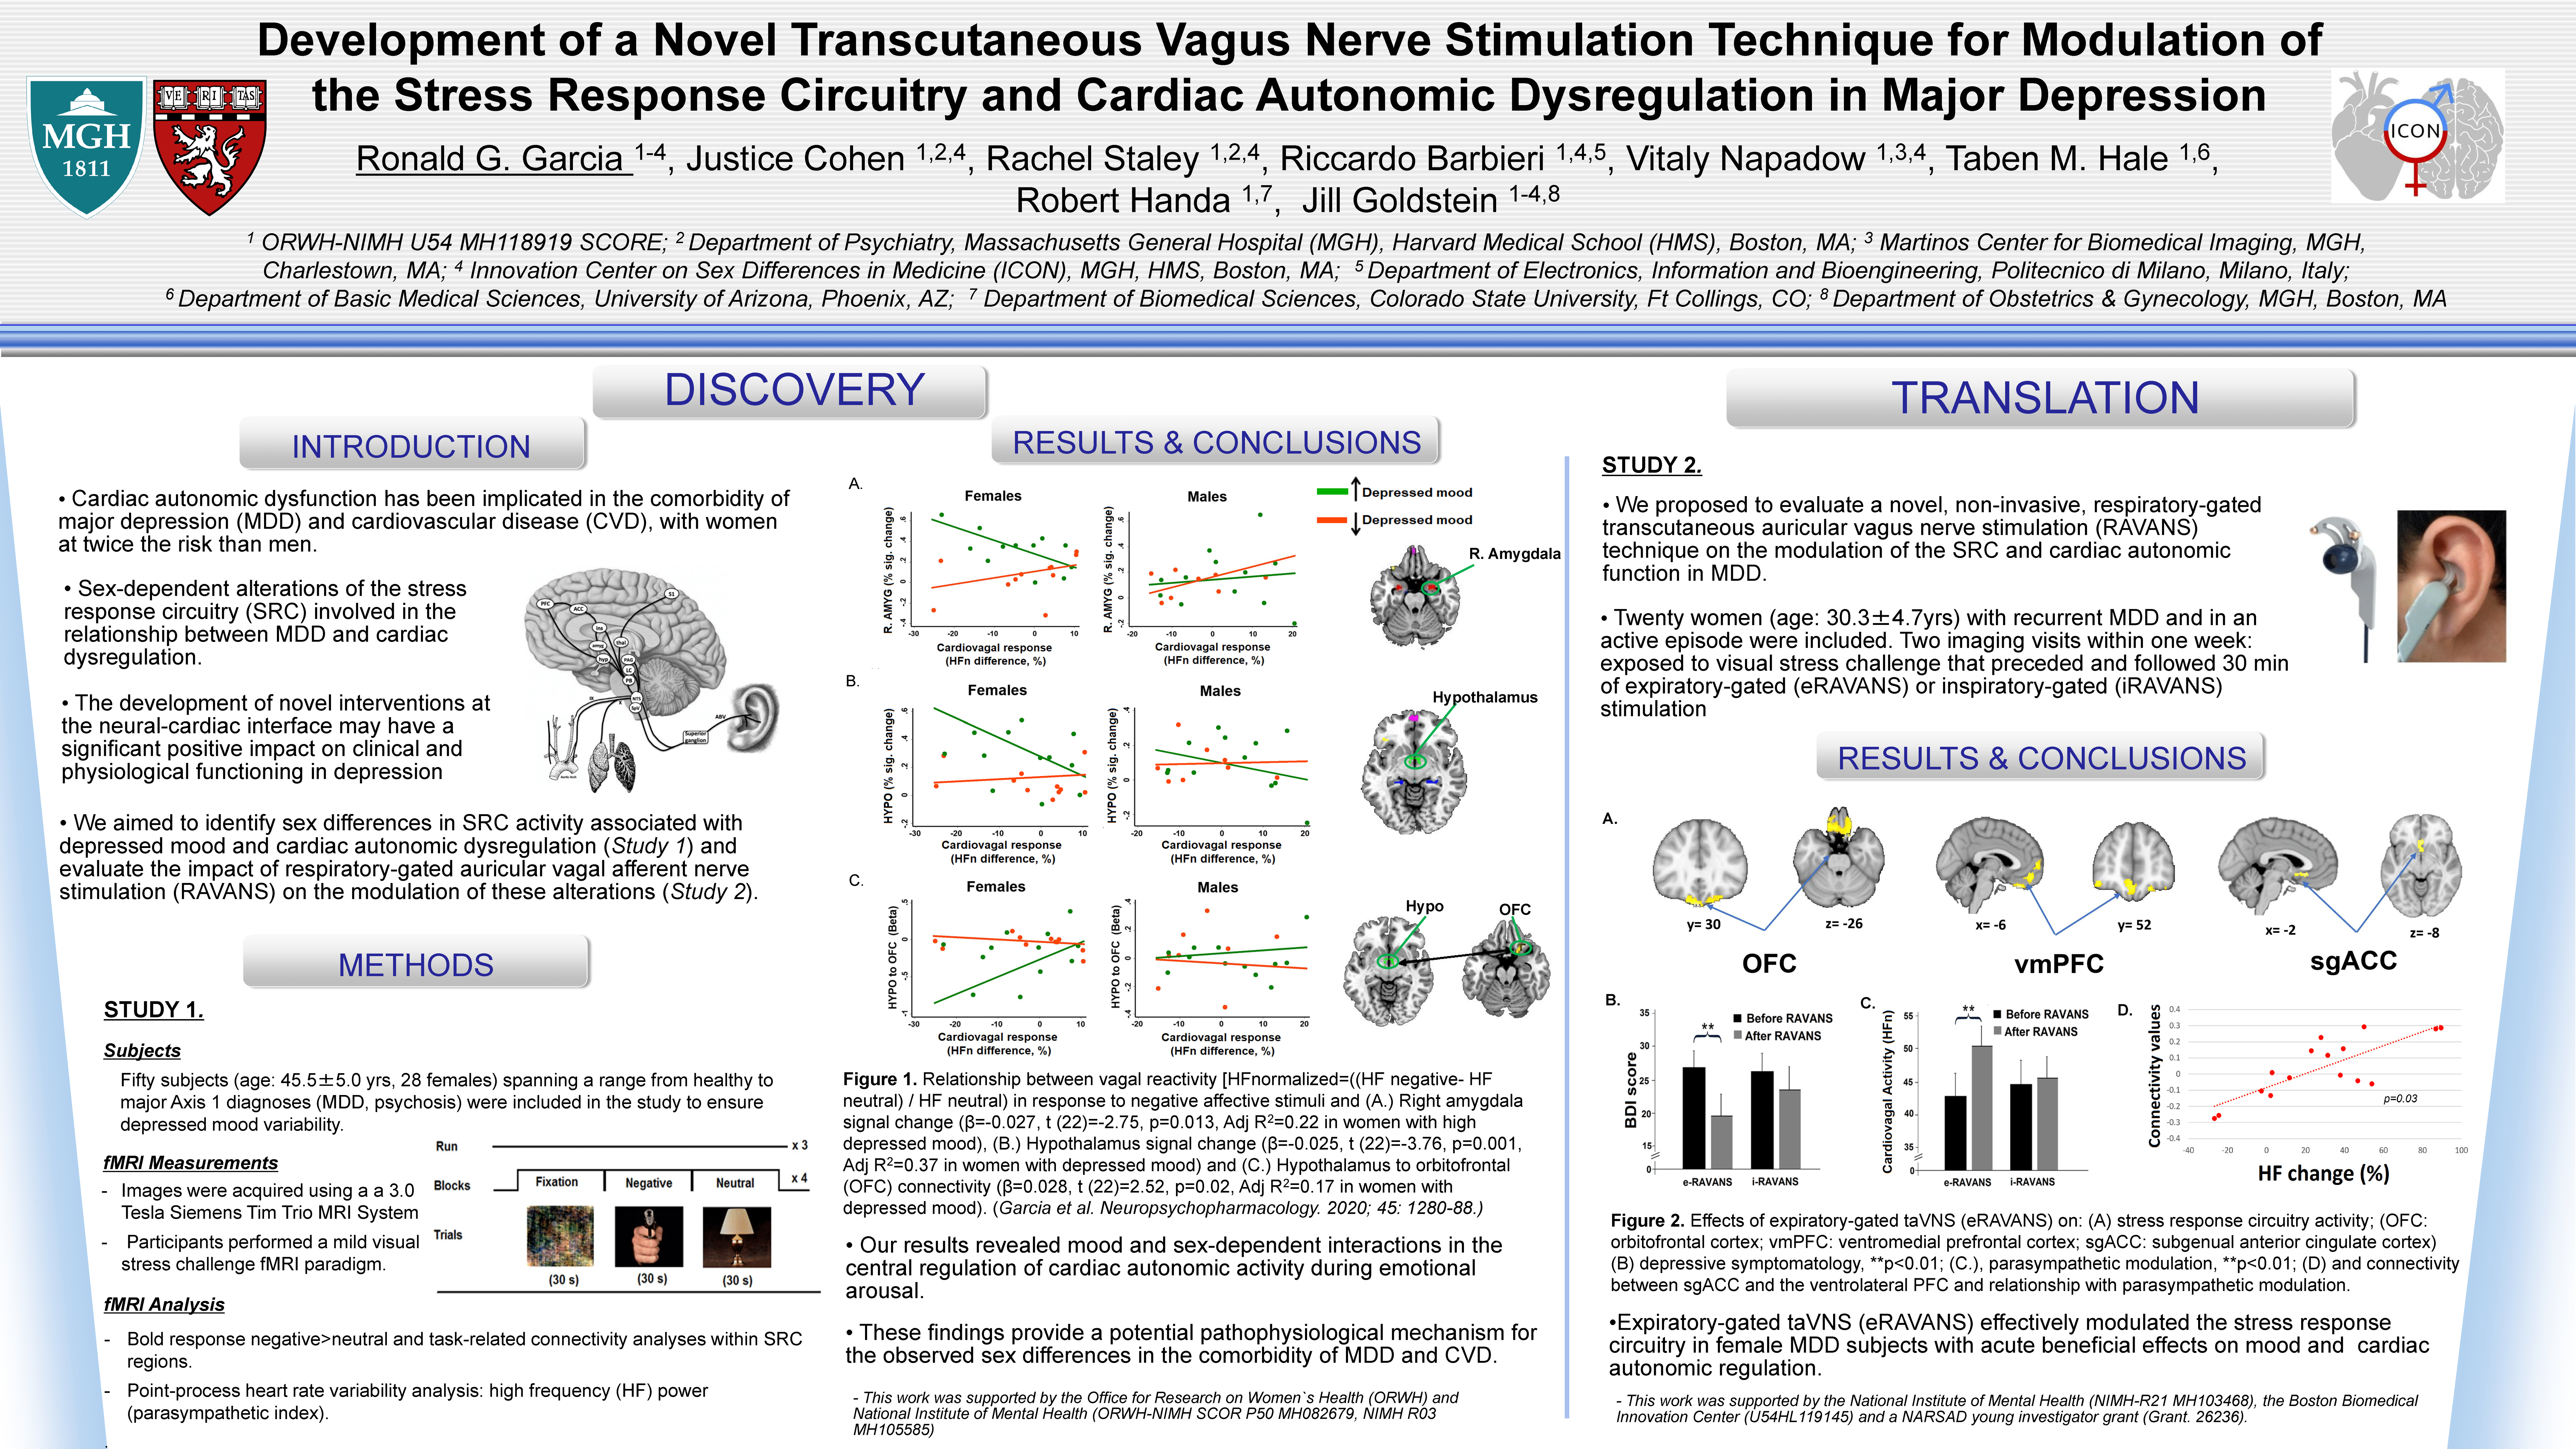 Development of a Novel Transcutaneous Vagus Nerve Stimulation Technique for Modulation of the Stress Response Circuitry and Cardiac Autonomic Dysregulation in Major Depression